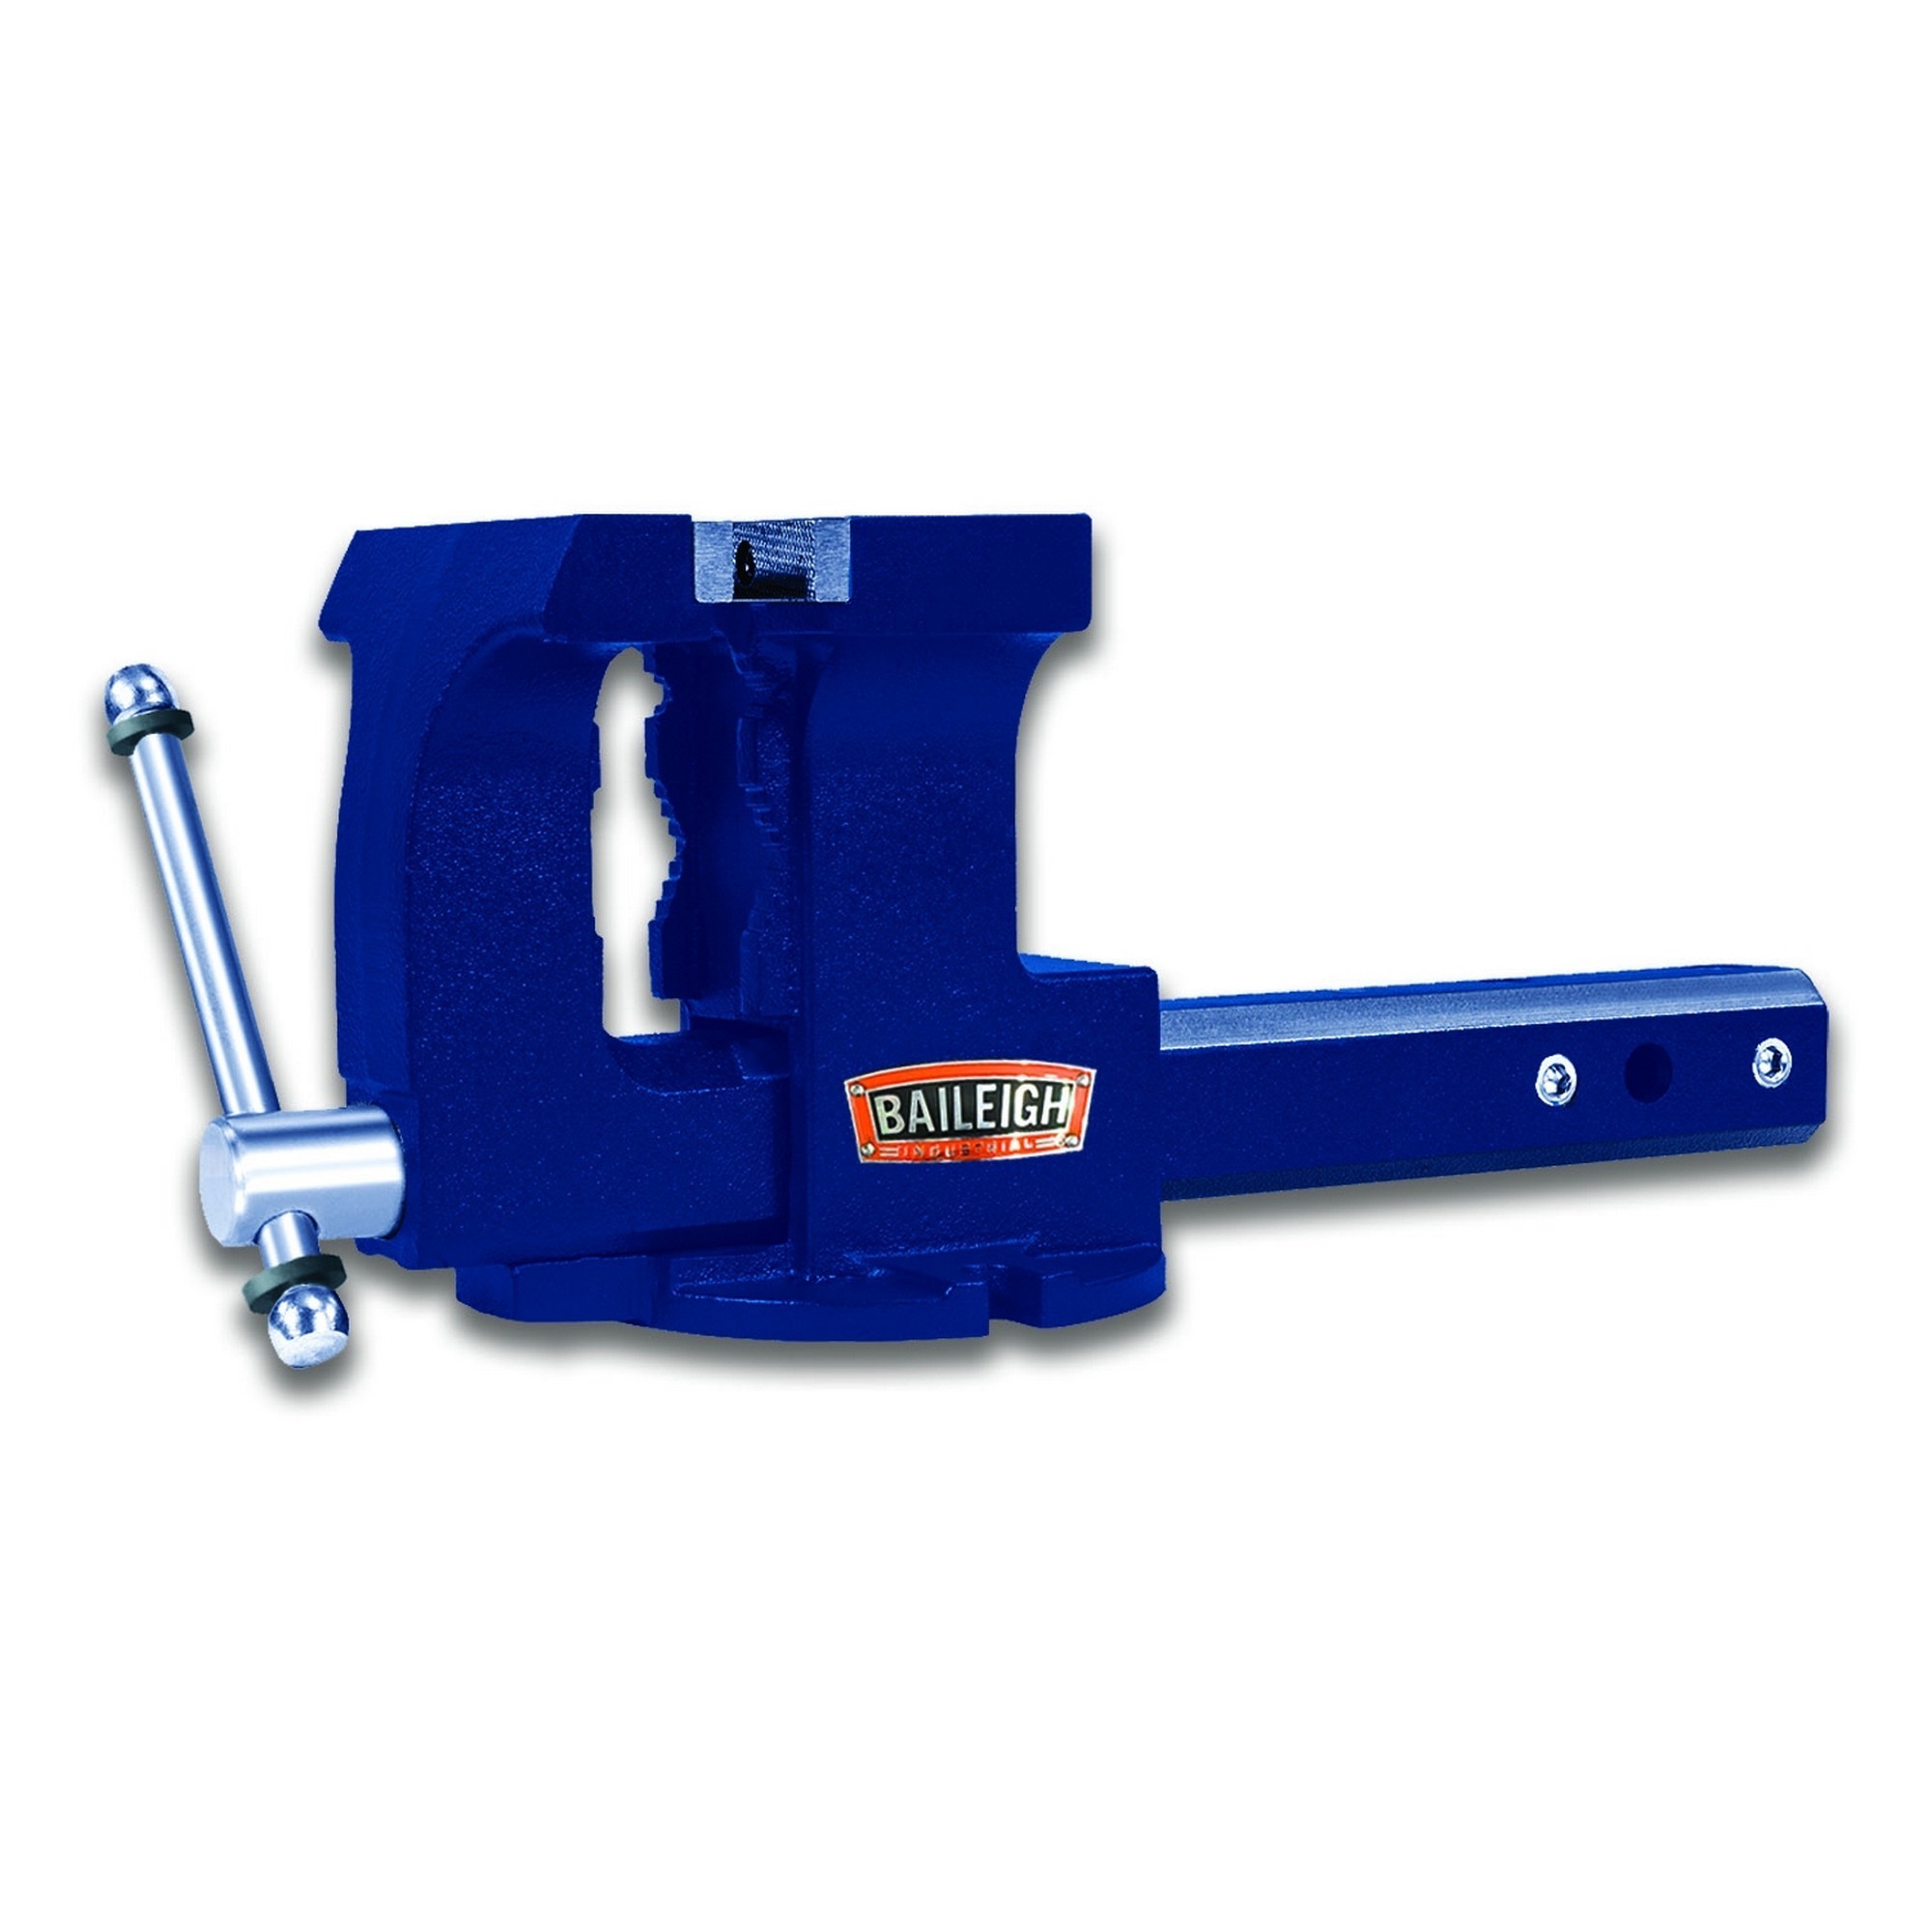 Baileigh, Vise, Jaw Width 6 in, Jaw Capacity 6 in, Model BV-6HV